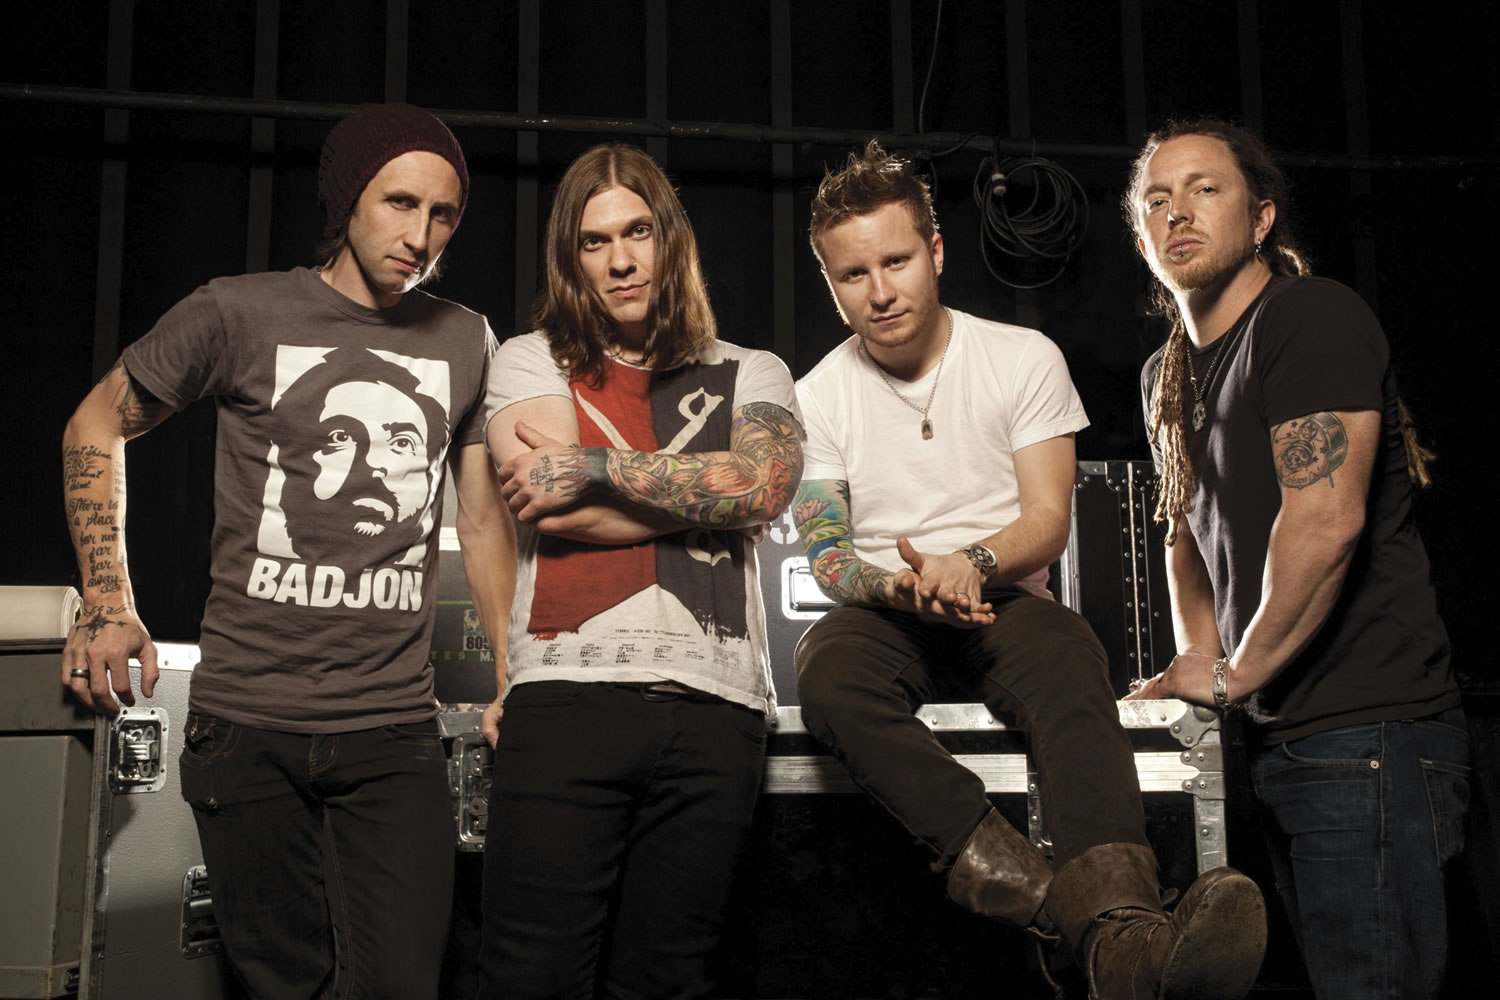 Shinedown will perform at the Uproar Festival on Sept.